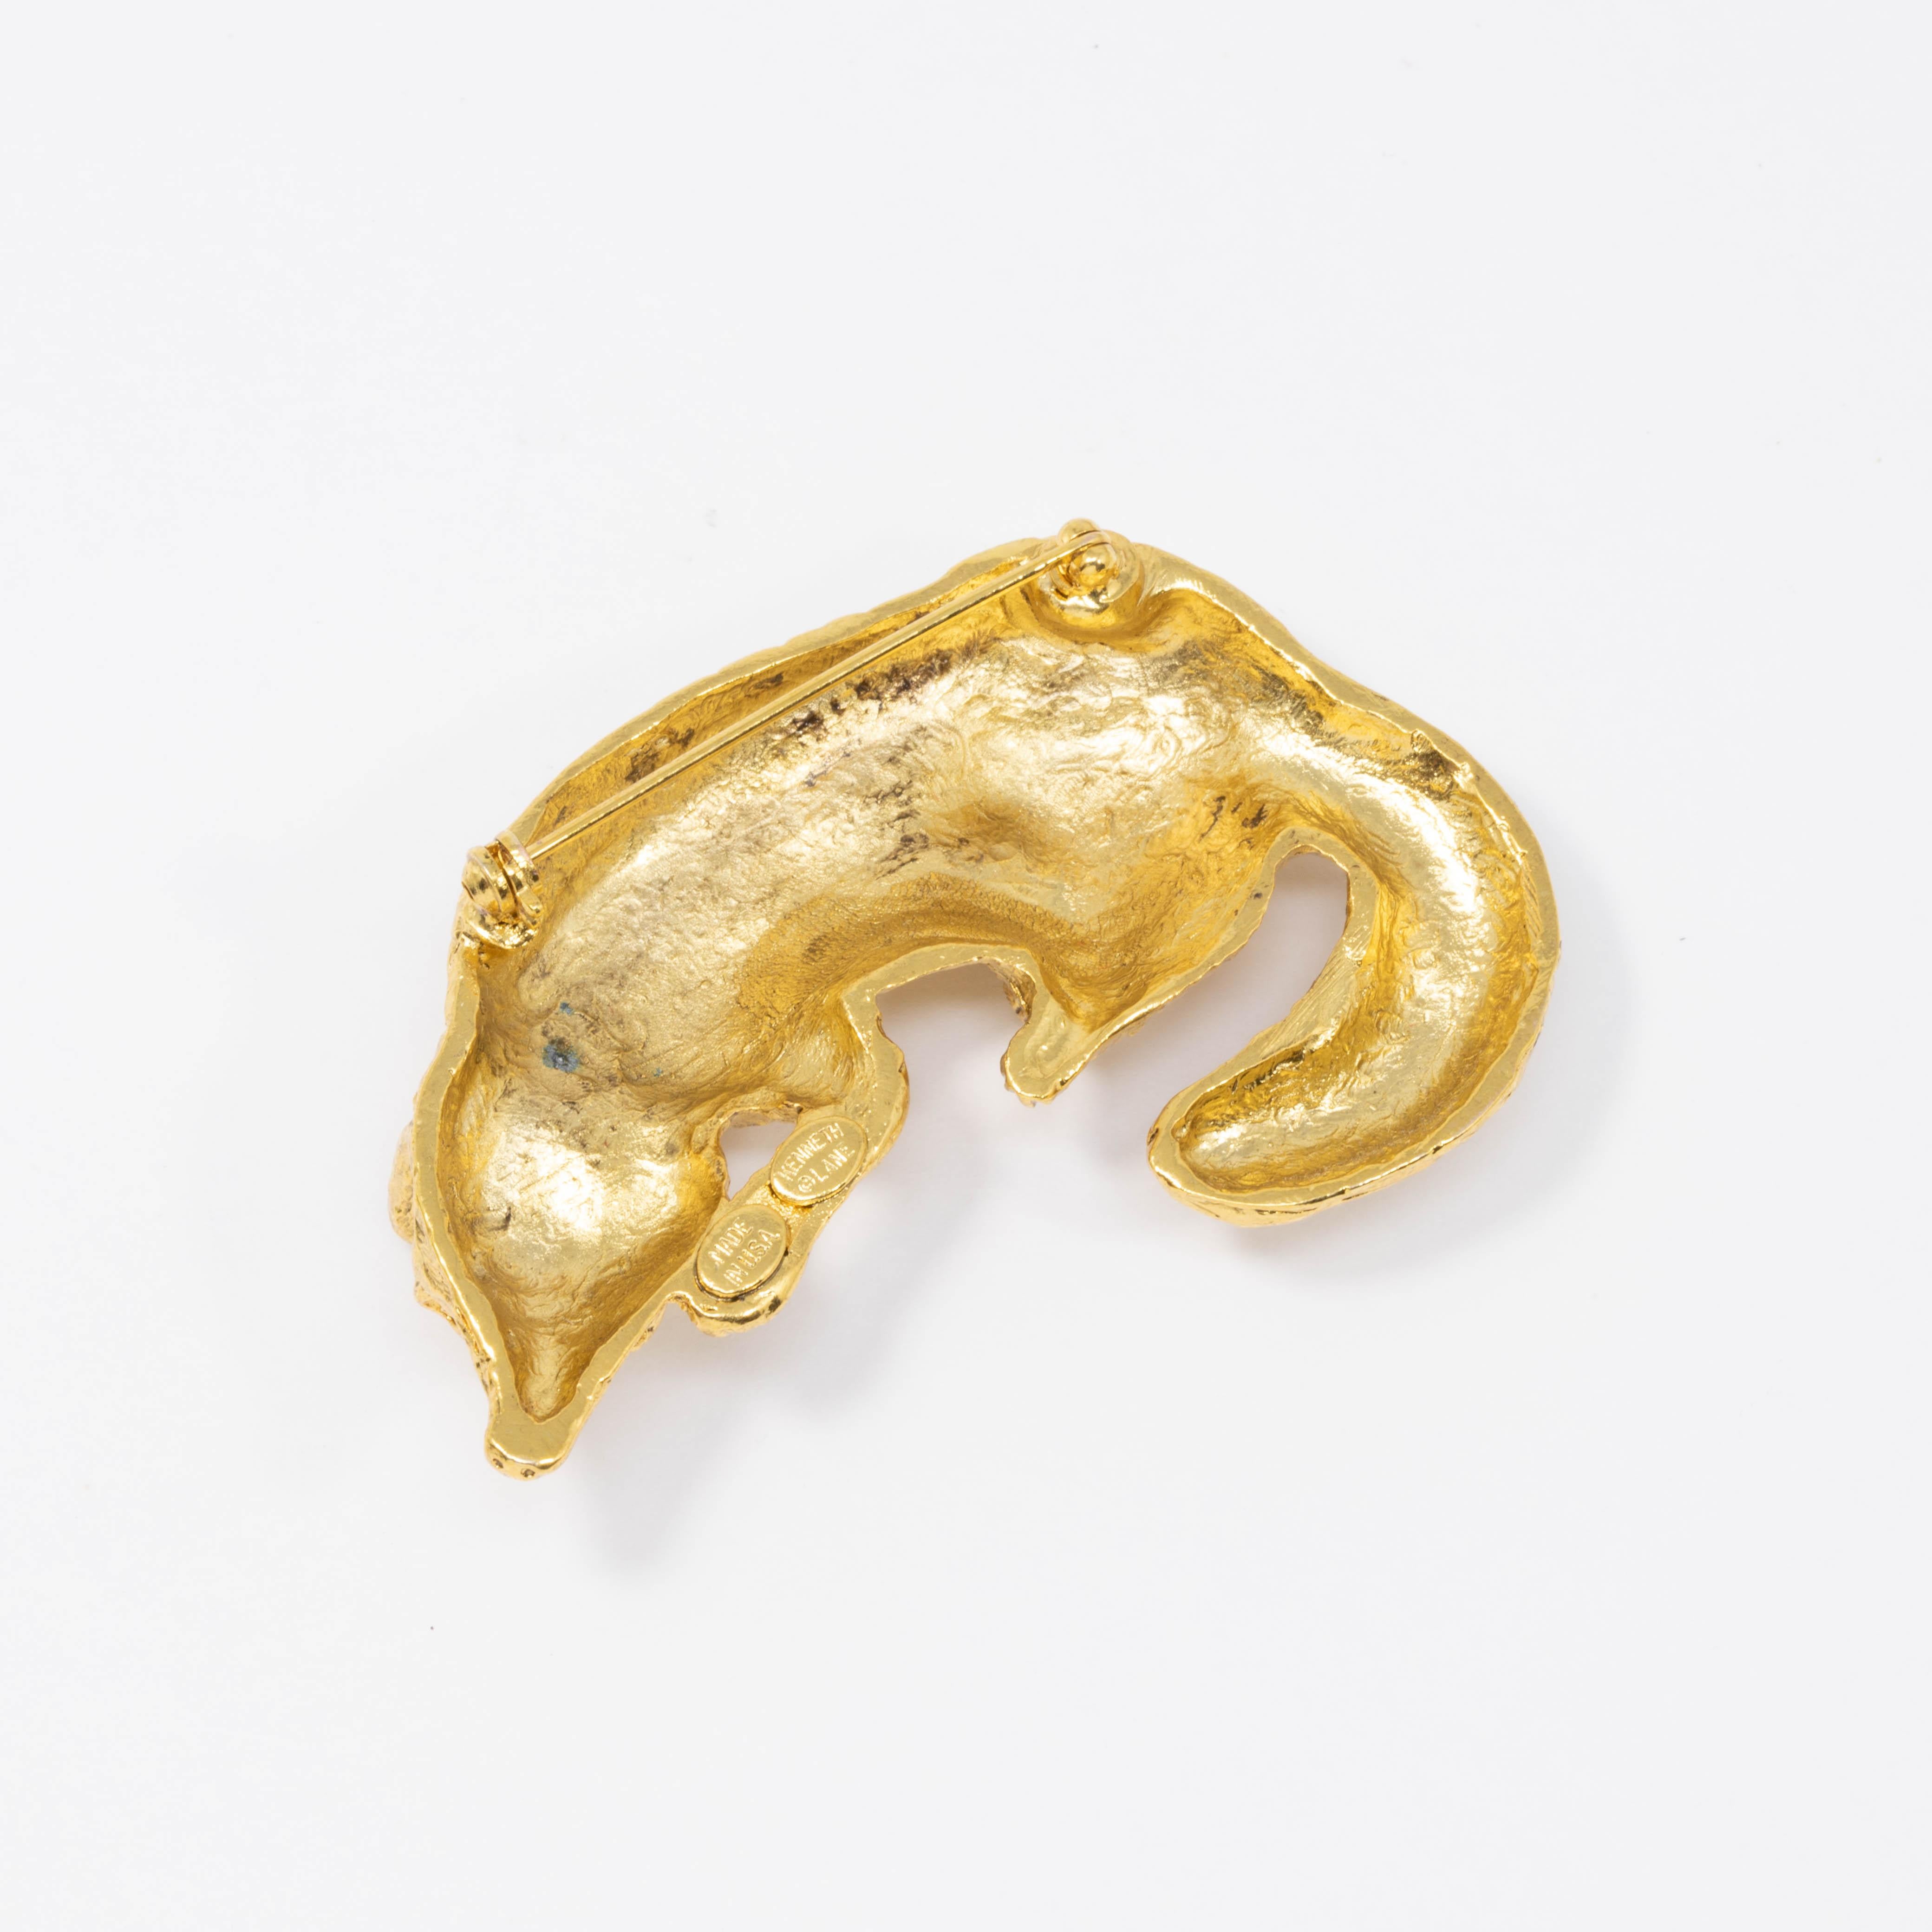 KJL Kenneth Jay Lane  Resting Fox Pin Brooch in Gold In New Condition For Sale In Milford, DE